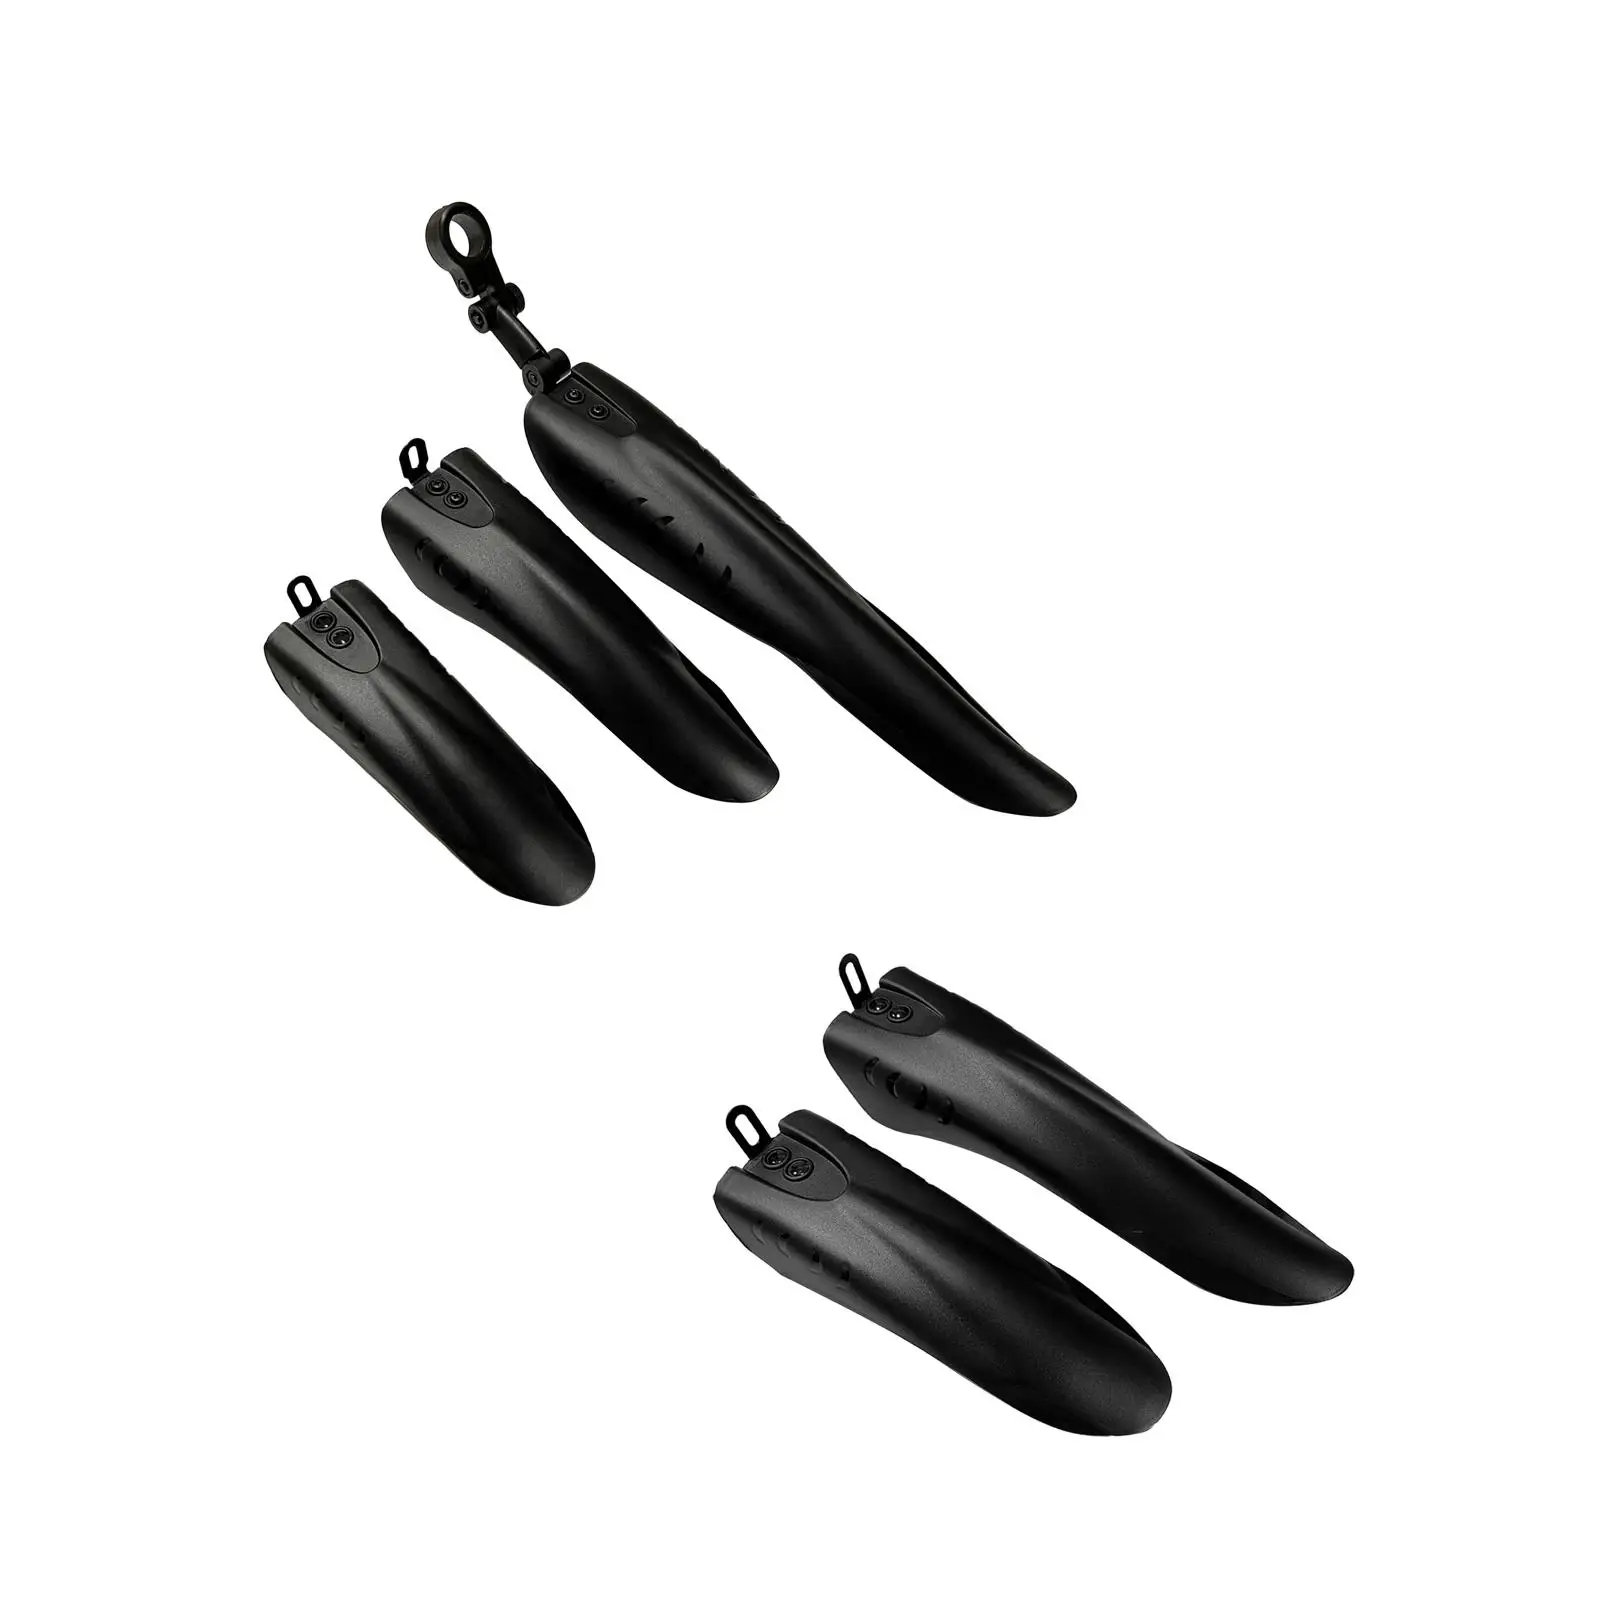 Mountain Bike Mudguard Set Repair Simple Installation Sturdy Wheel Protection Spare Parts Mud Guard for Outdoor Riding